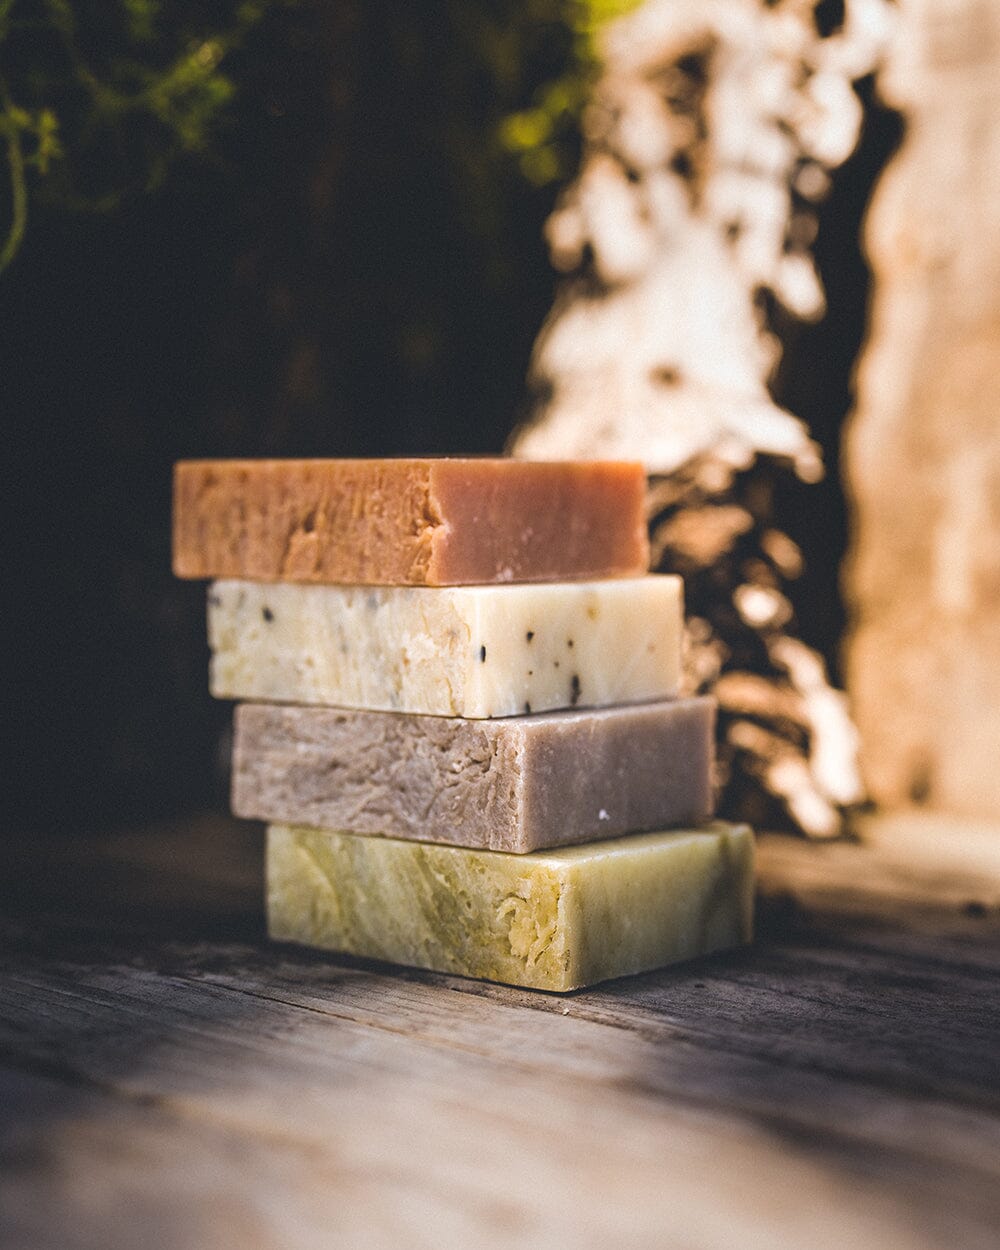 A layered stack of 4 all natural soap bars from Iron Lion Soap resting on a wood table 